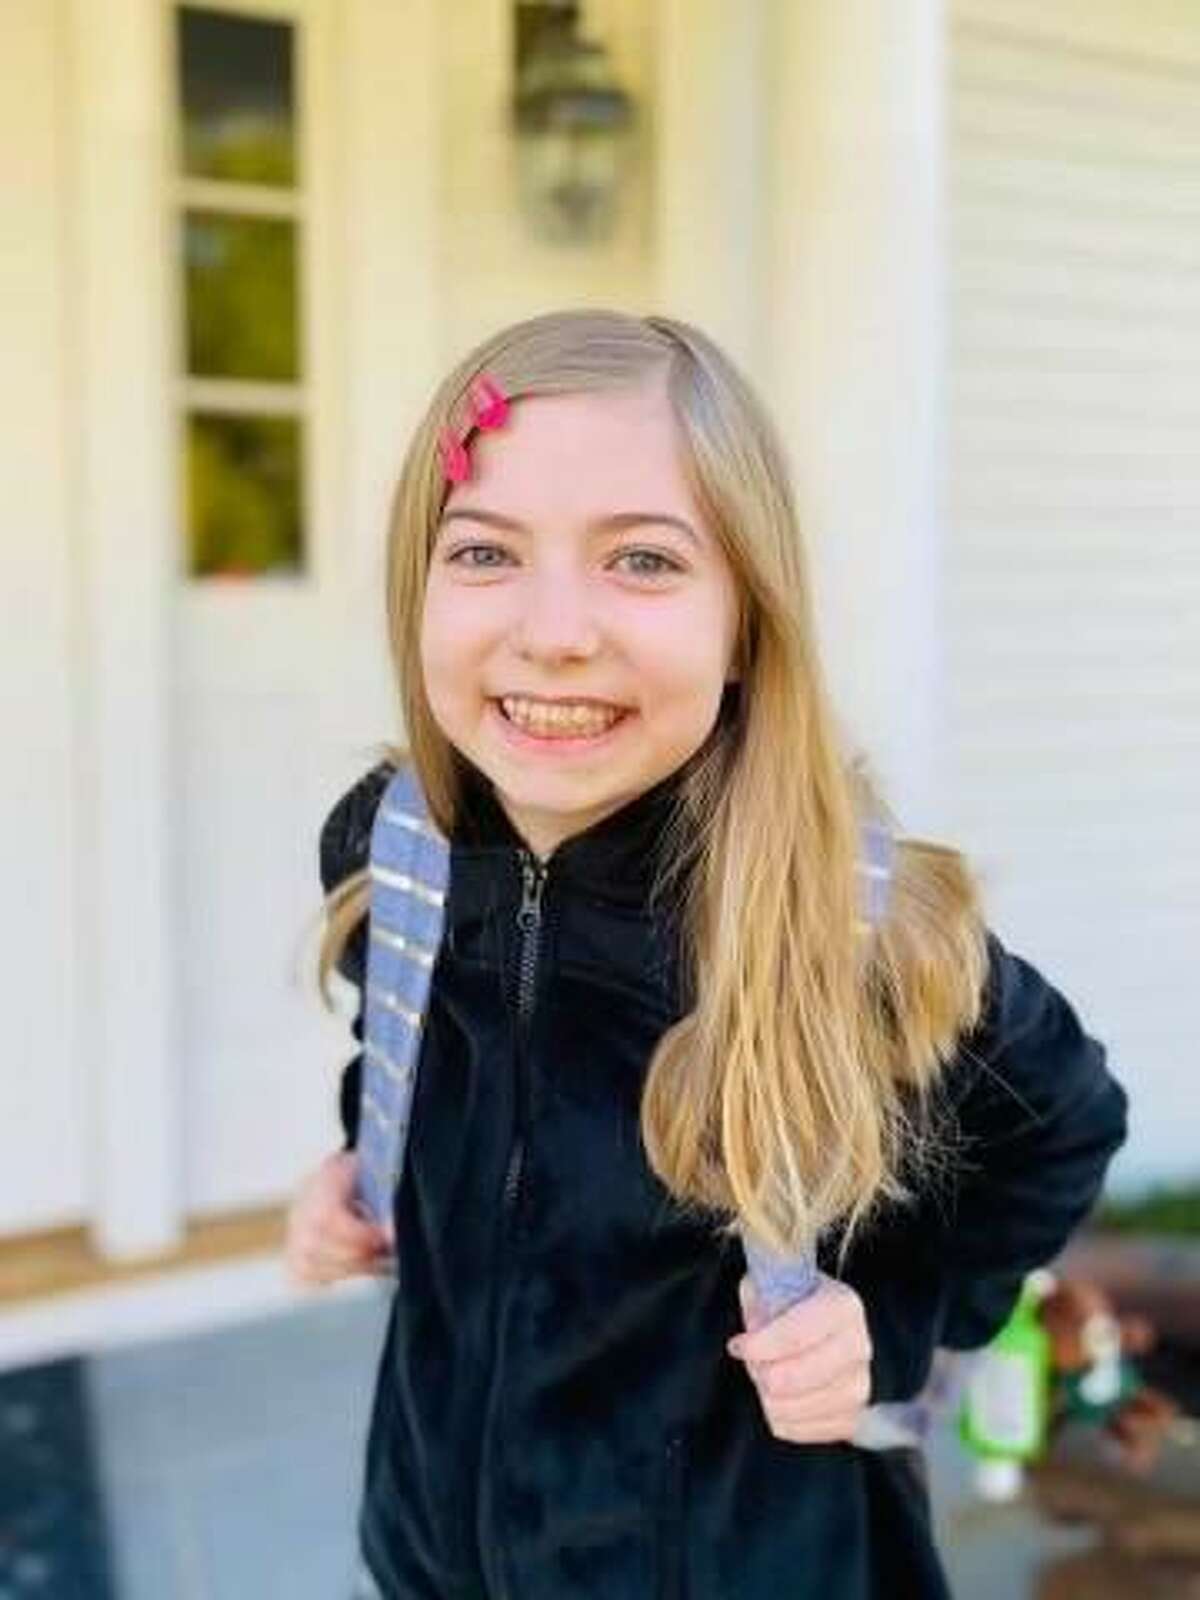 Ridgefield student Sofia Cluney was all smiles as she prepared to return to Branchville Elemenrary School in person for the first time since last year.